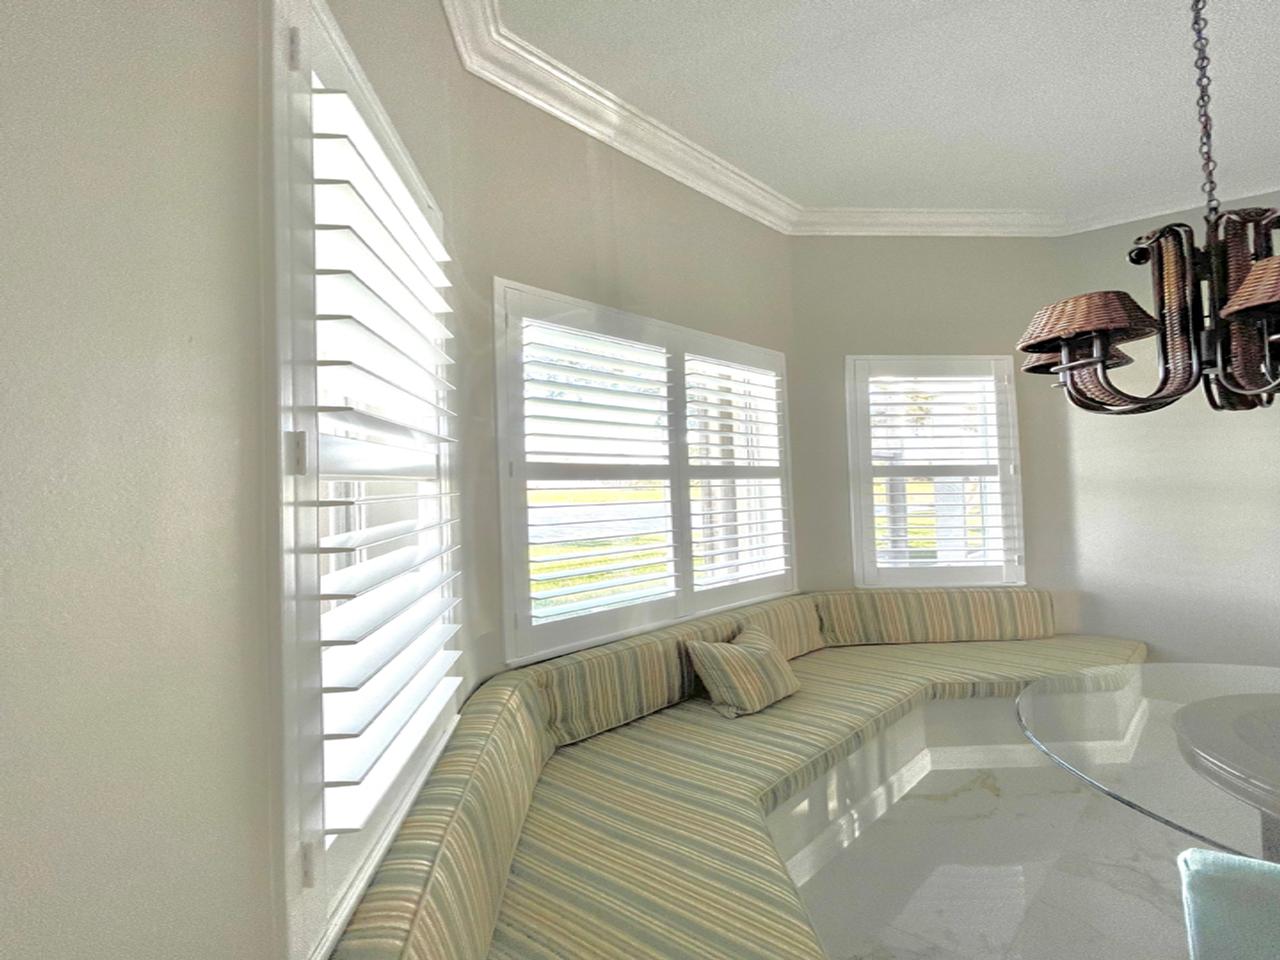 Bay window with shutters